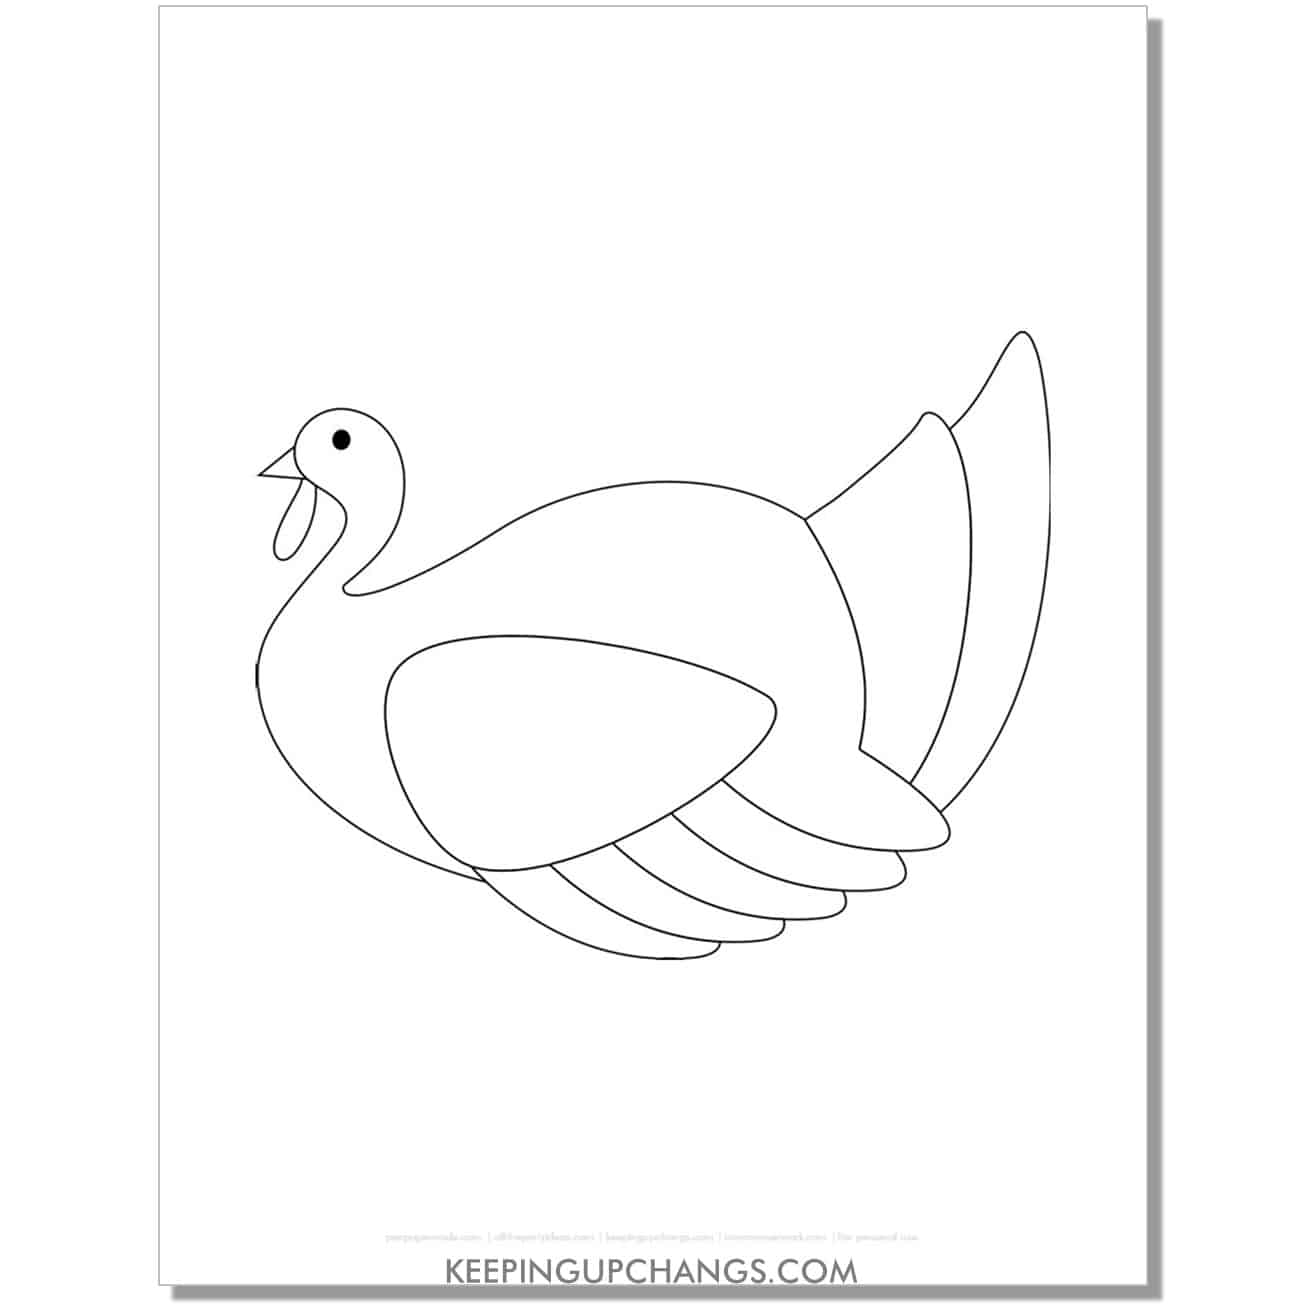 large, sitting turkey template in side view with wings and feathers.